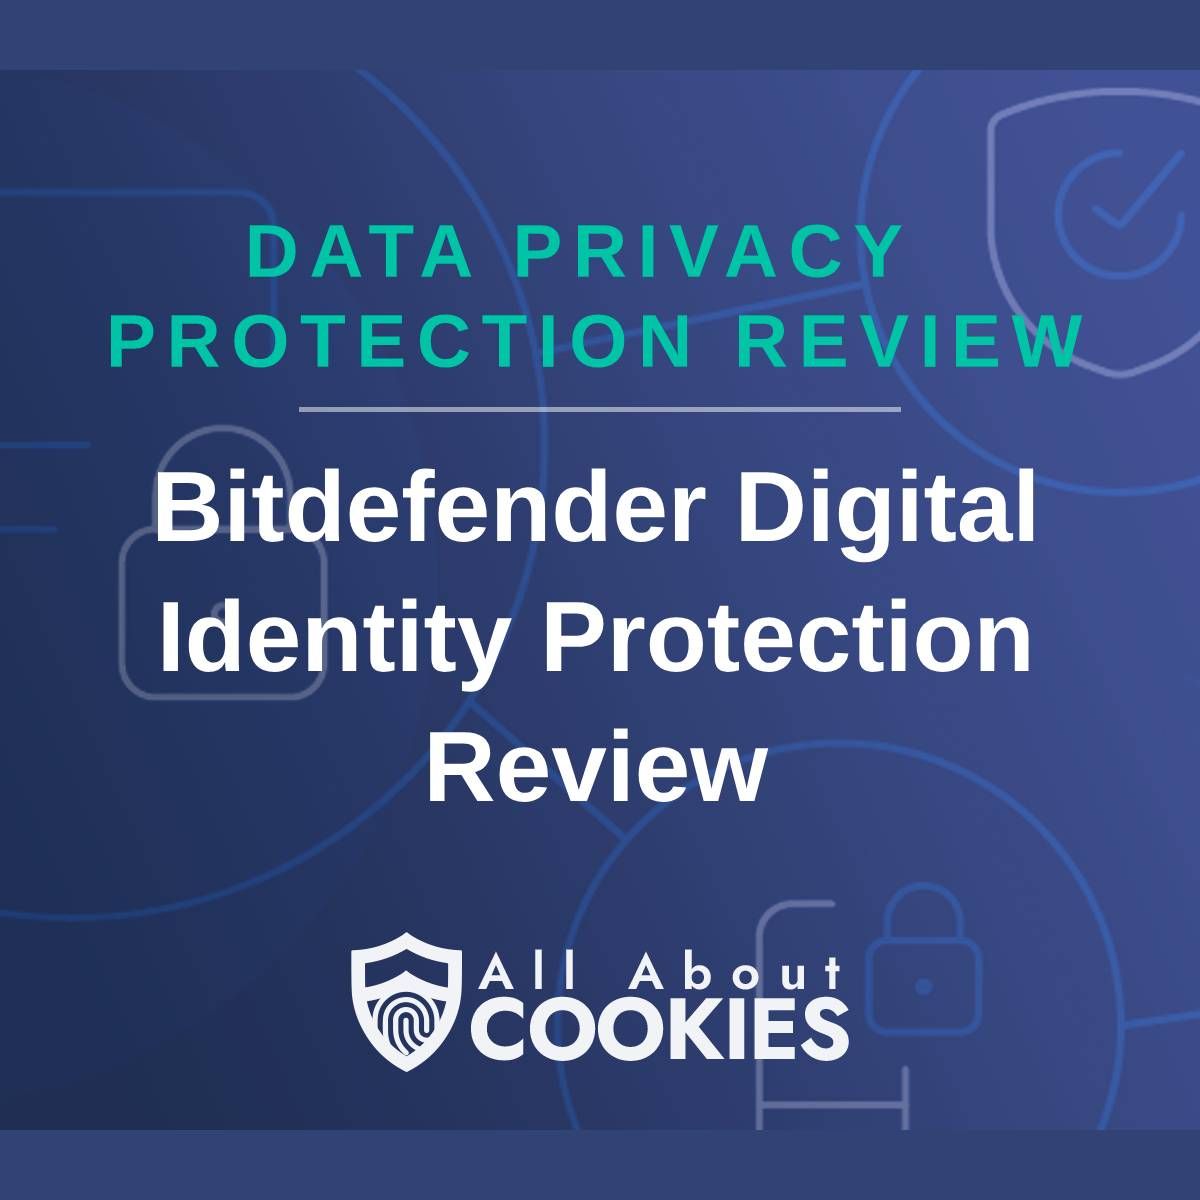 A blue background with images of locks and shields with the text &quot;Data Privacy Protection Review Bitdefender Digital Identity Protection Review&quot; and the All About Cookies logo. 